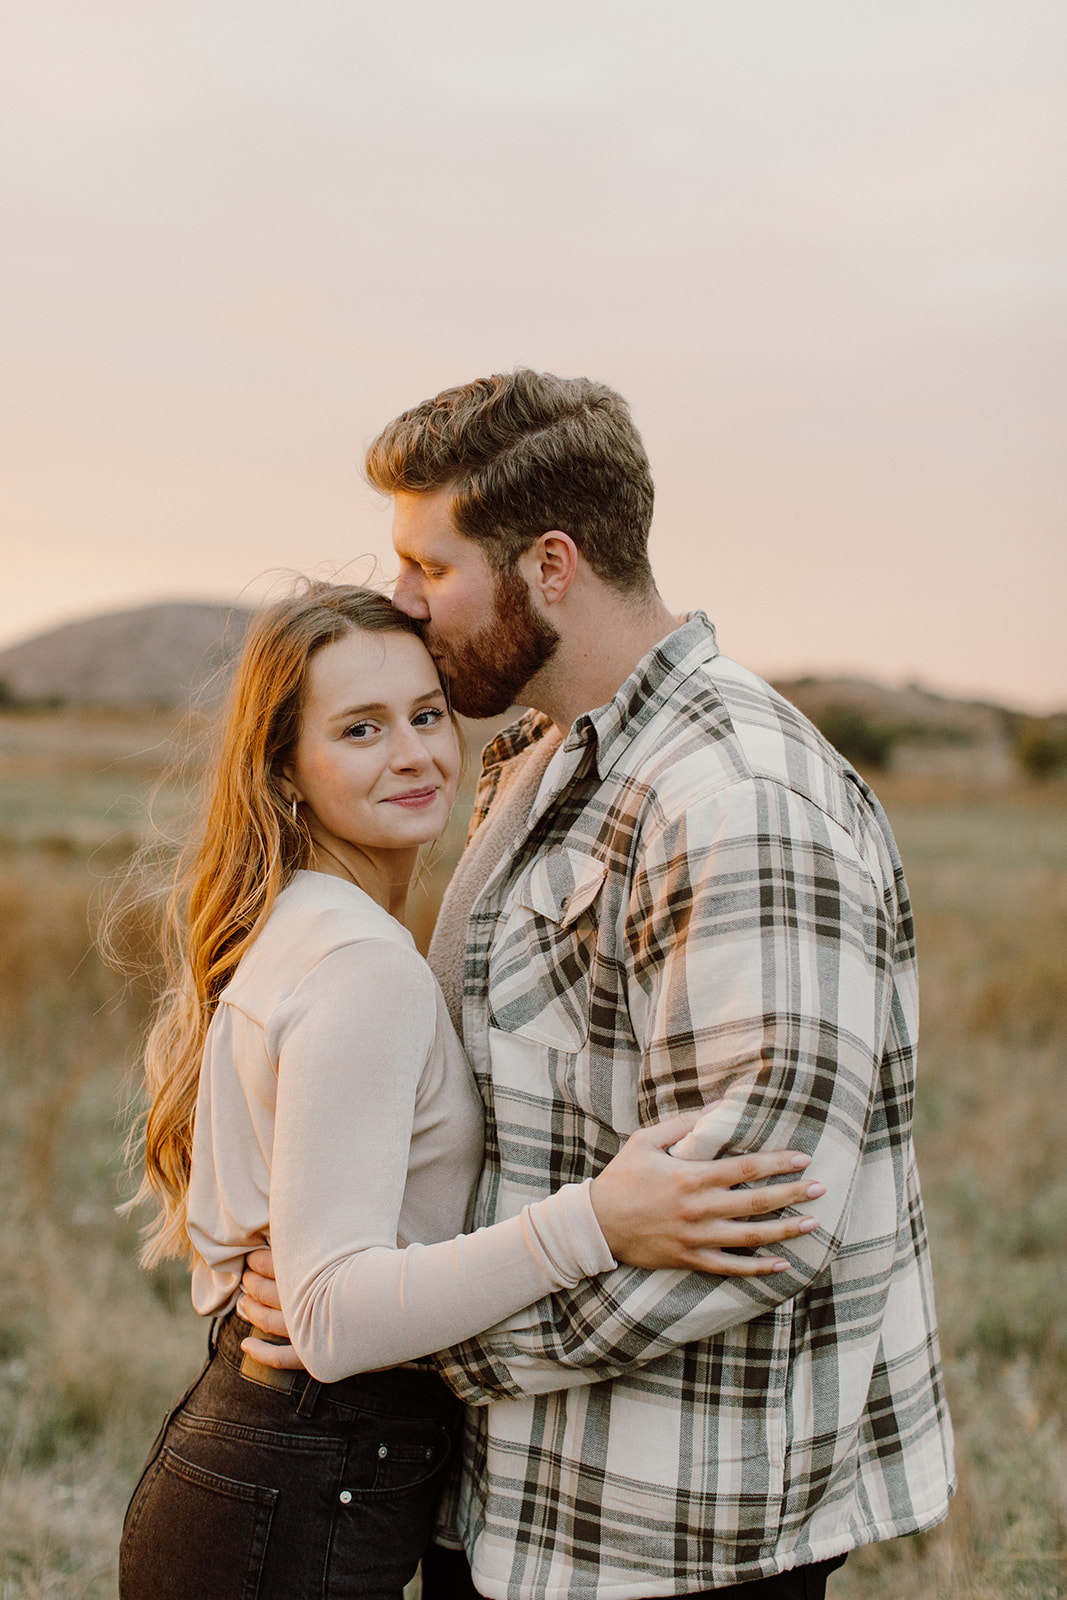 Engagement Session at the Wichita Mountains with a stunning Oklahoma Sunset